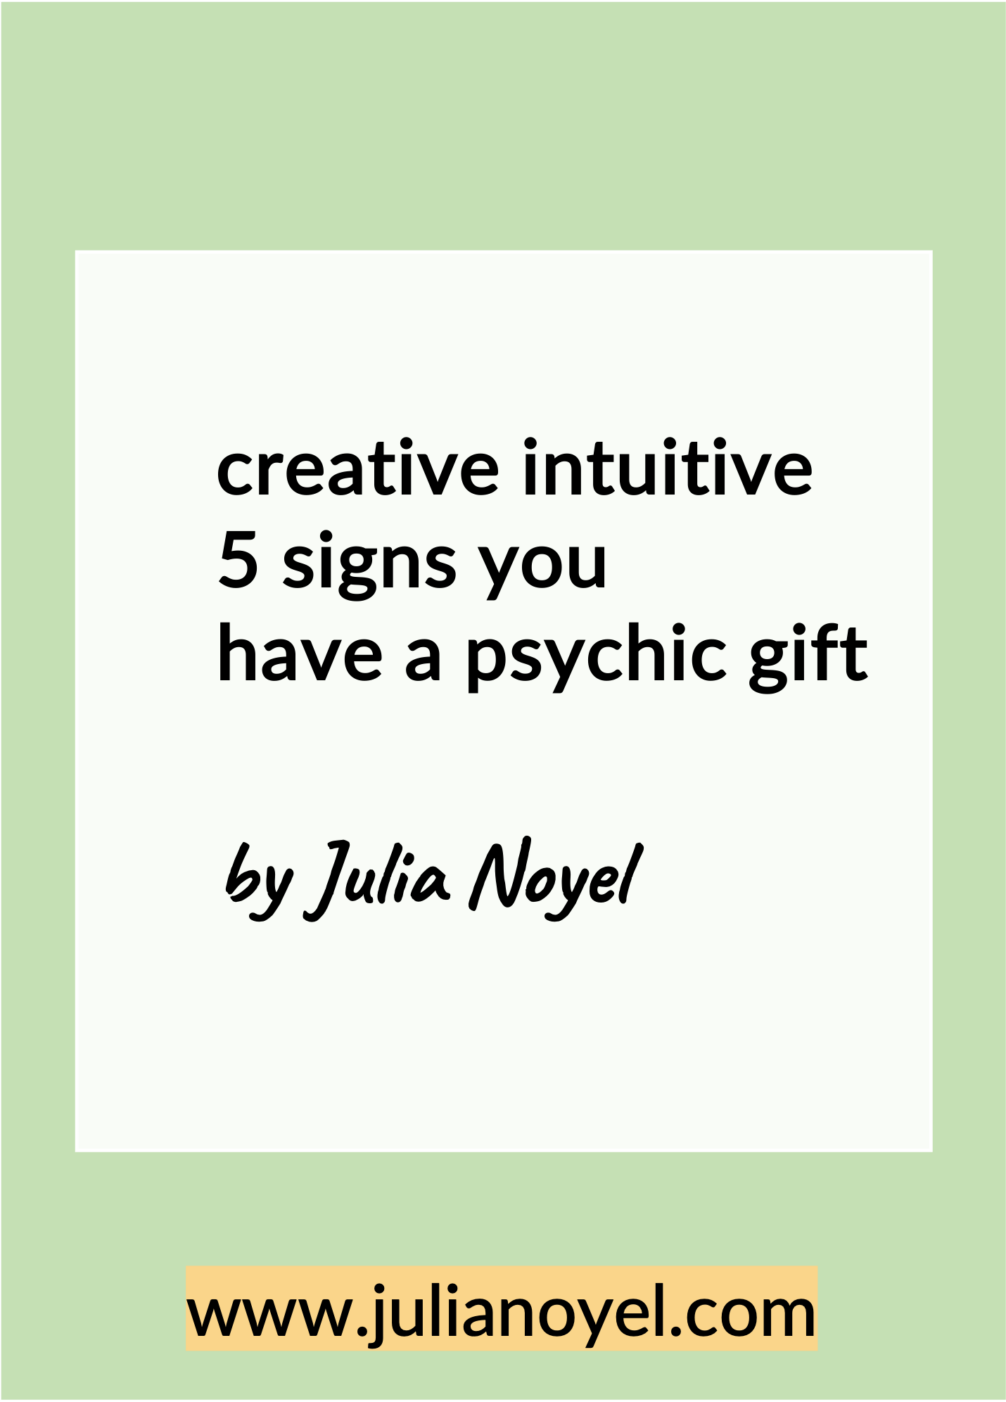 creative intuitive 5 signs you have a psychic gift by Julia Noyel